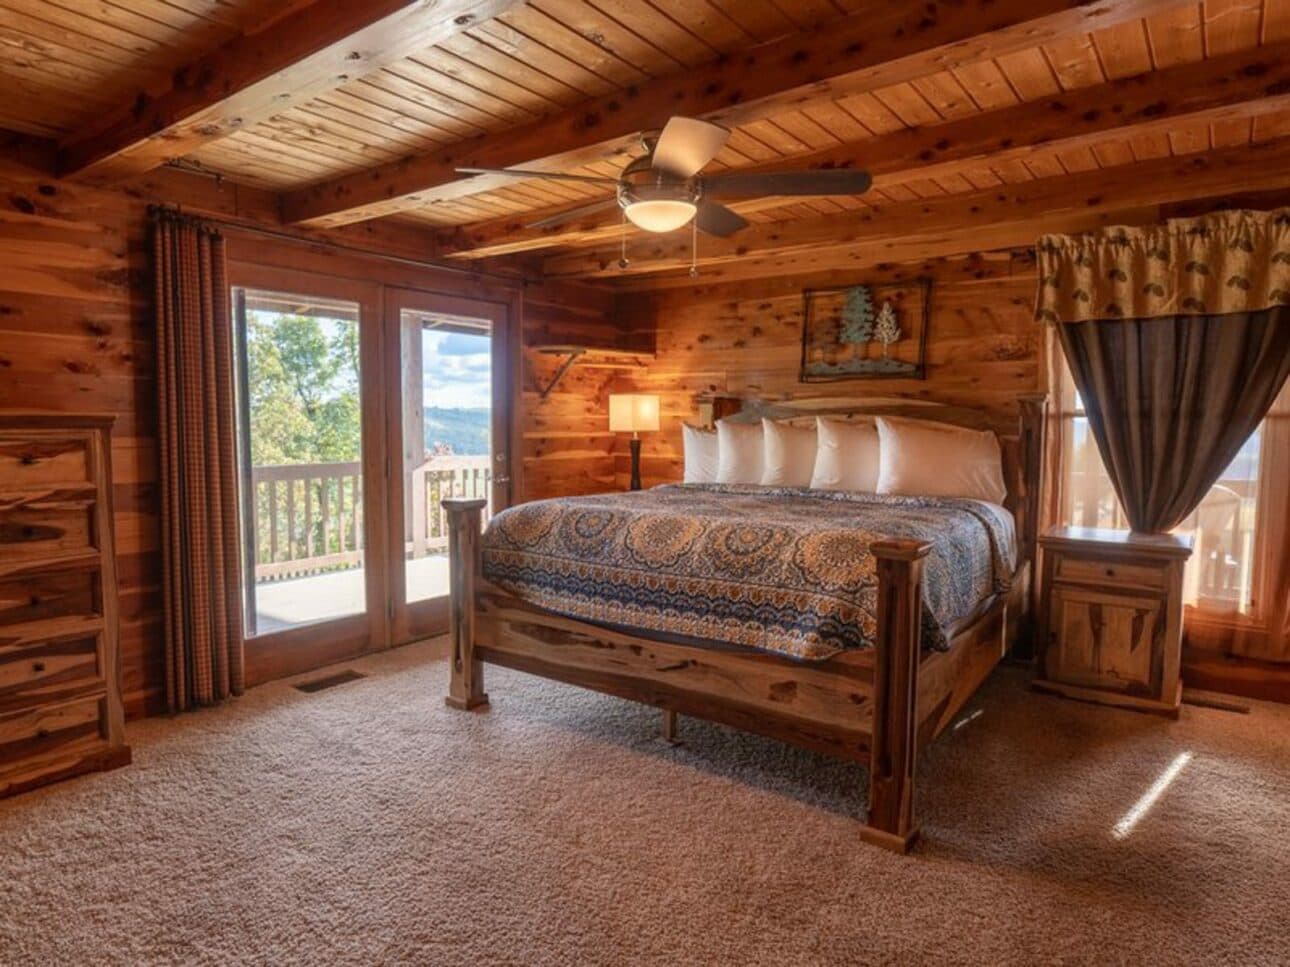 The spacious master bedroom of the Big Sky Cabin.